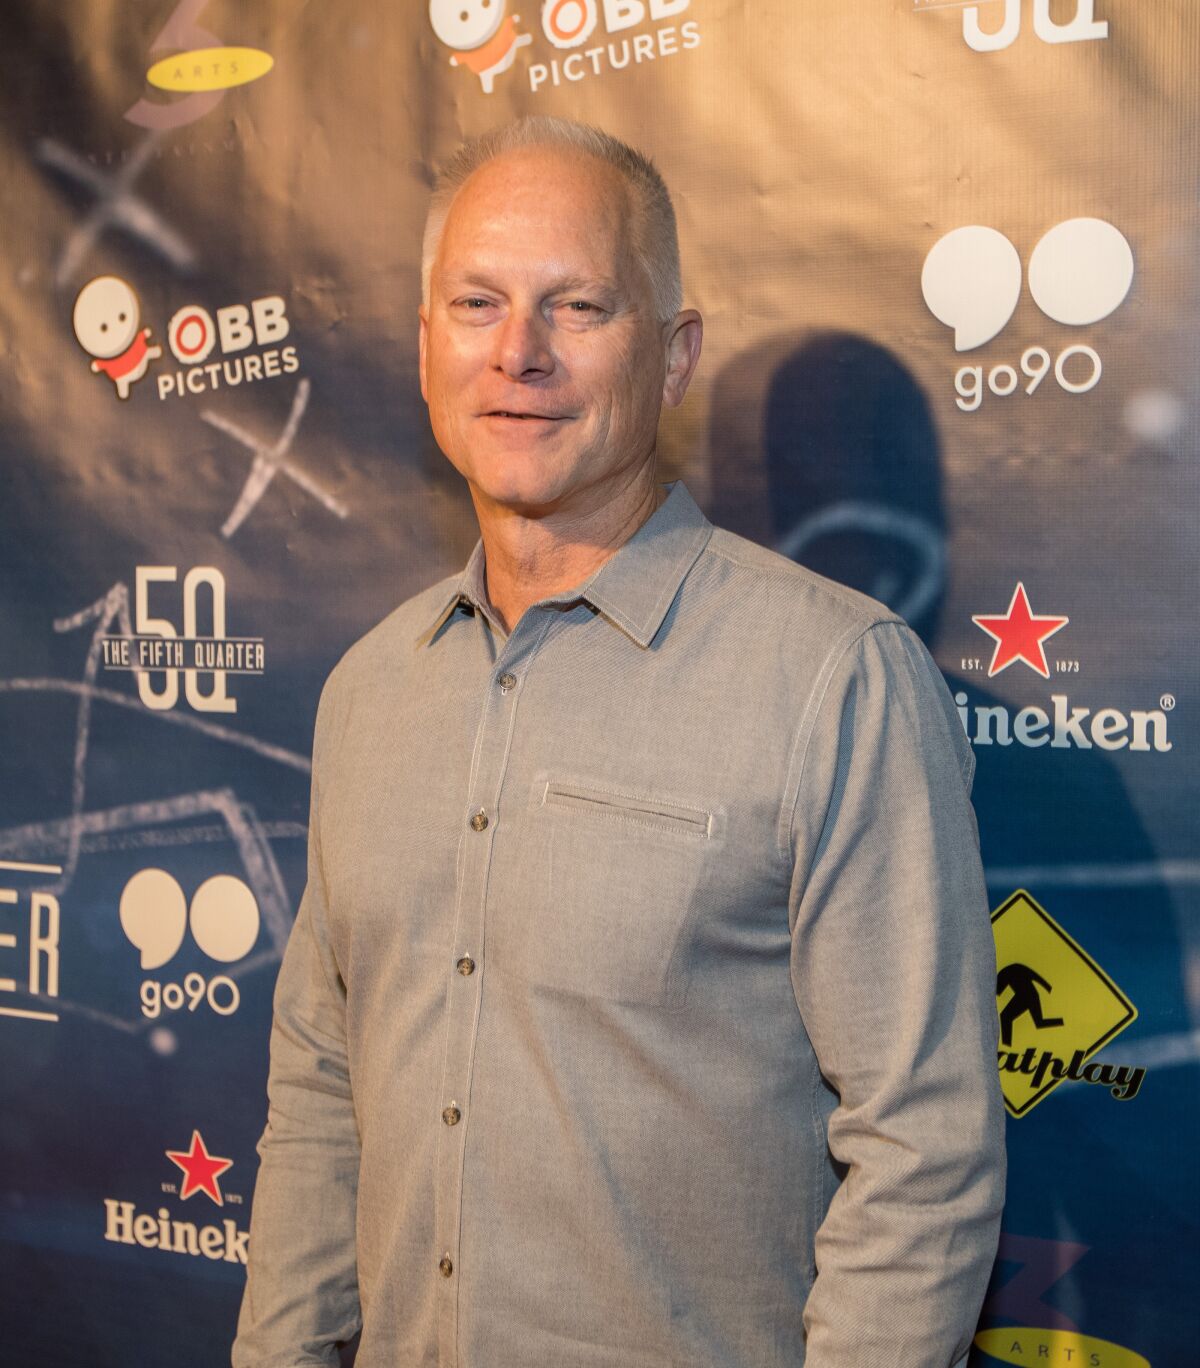 Kenny Mayne smiles while attending an event.